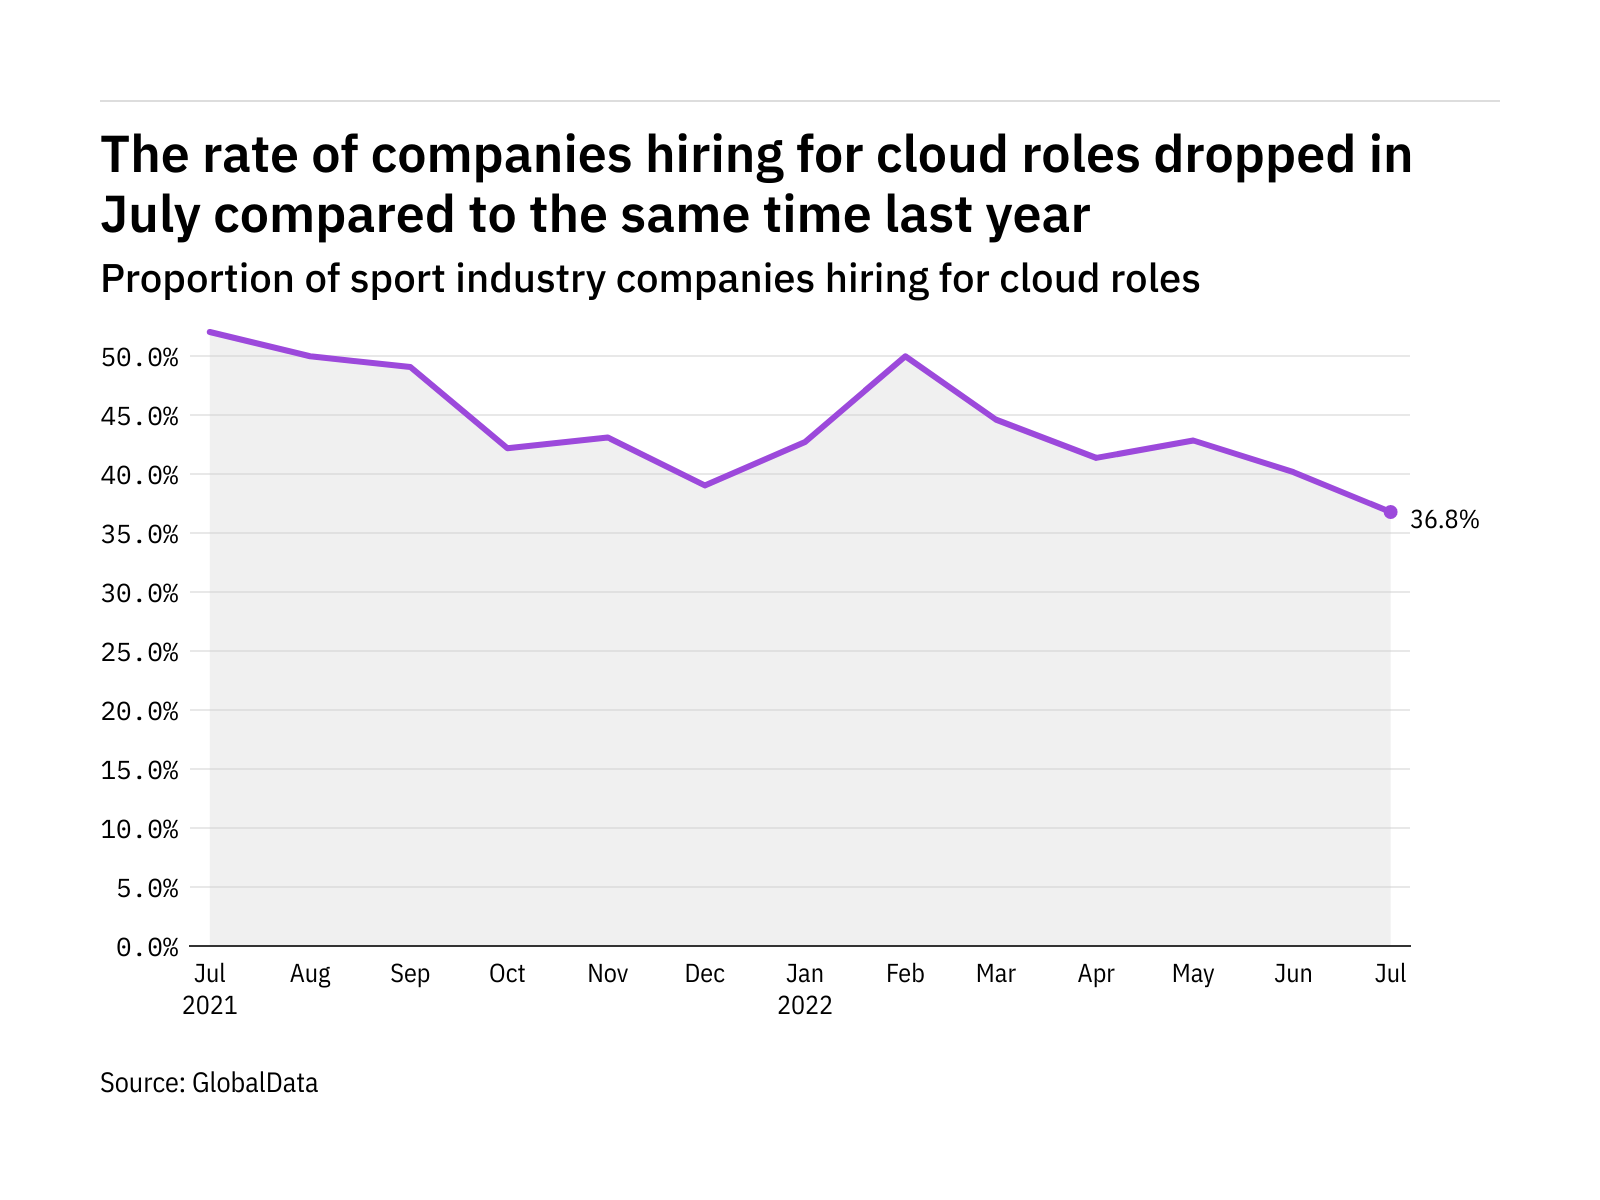 Cloud hiring levels in the sport industry fell to a year-low in July 2022